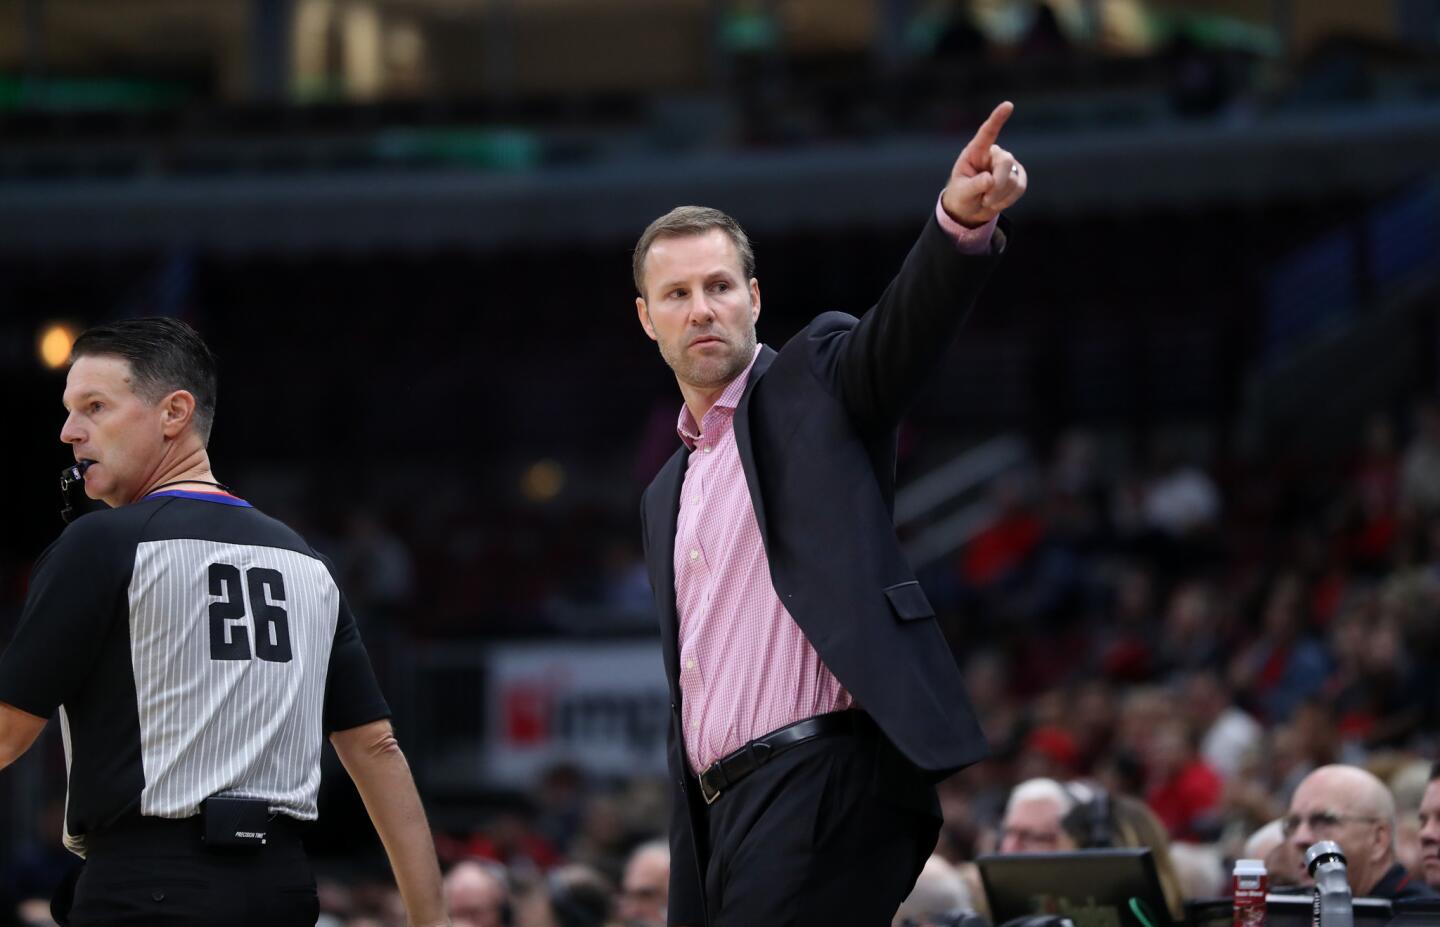 Bulls coach Fred Hoiberg points toward his bench in the first half of a preseason game against the Pacers at the United Center on Oct. 10, 2018.